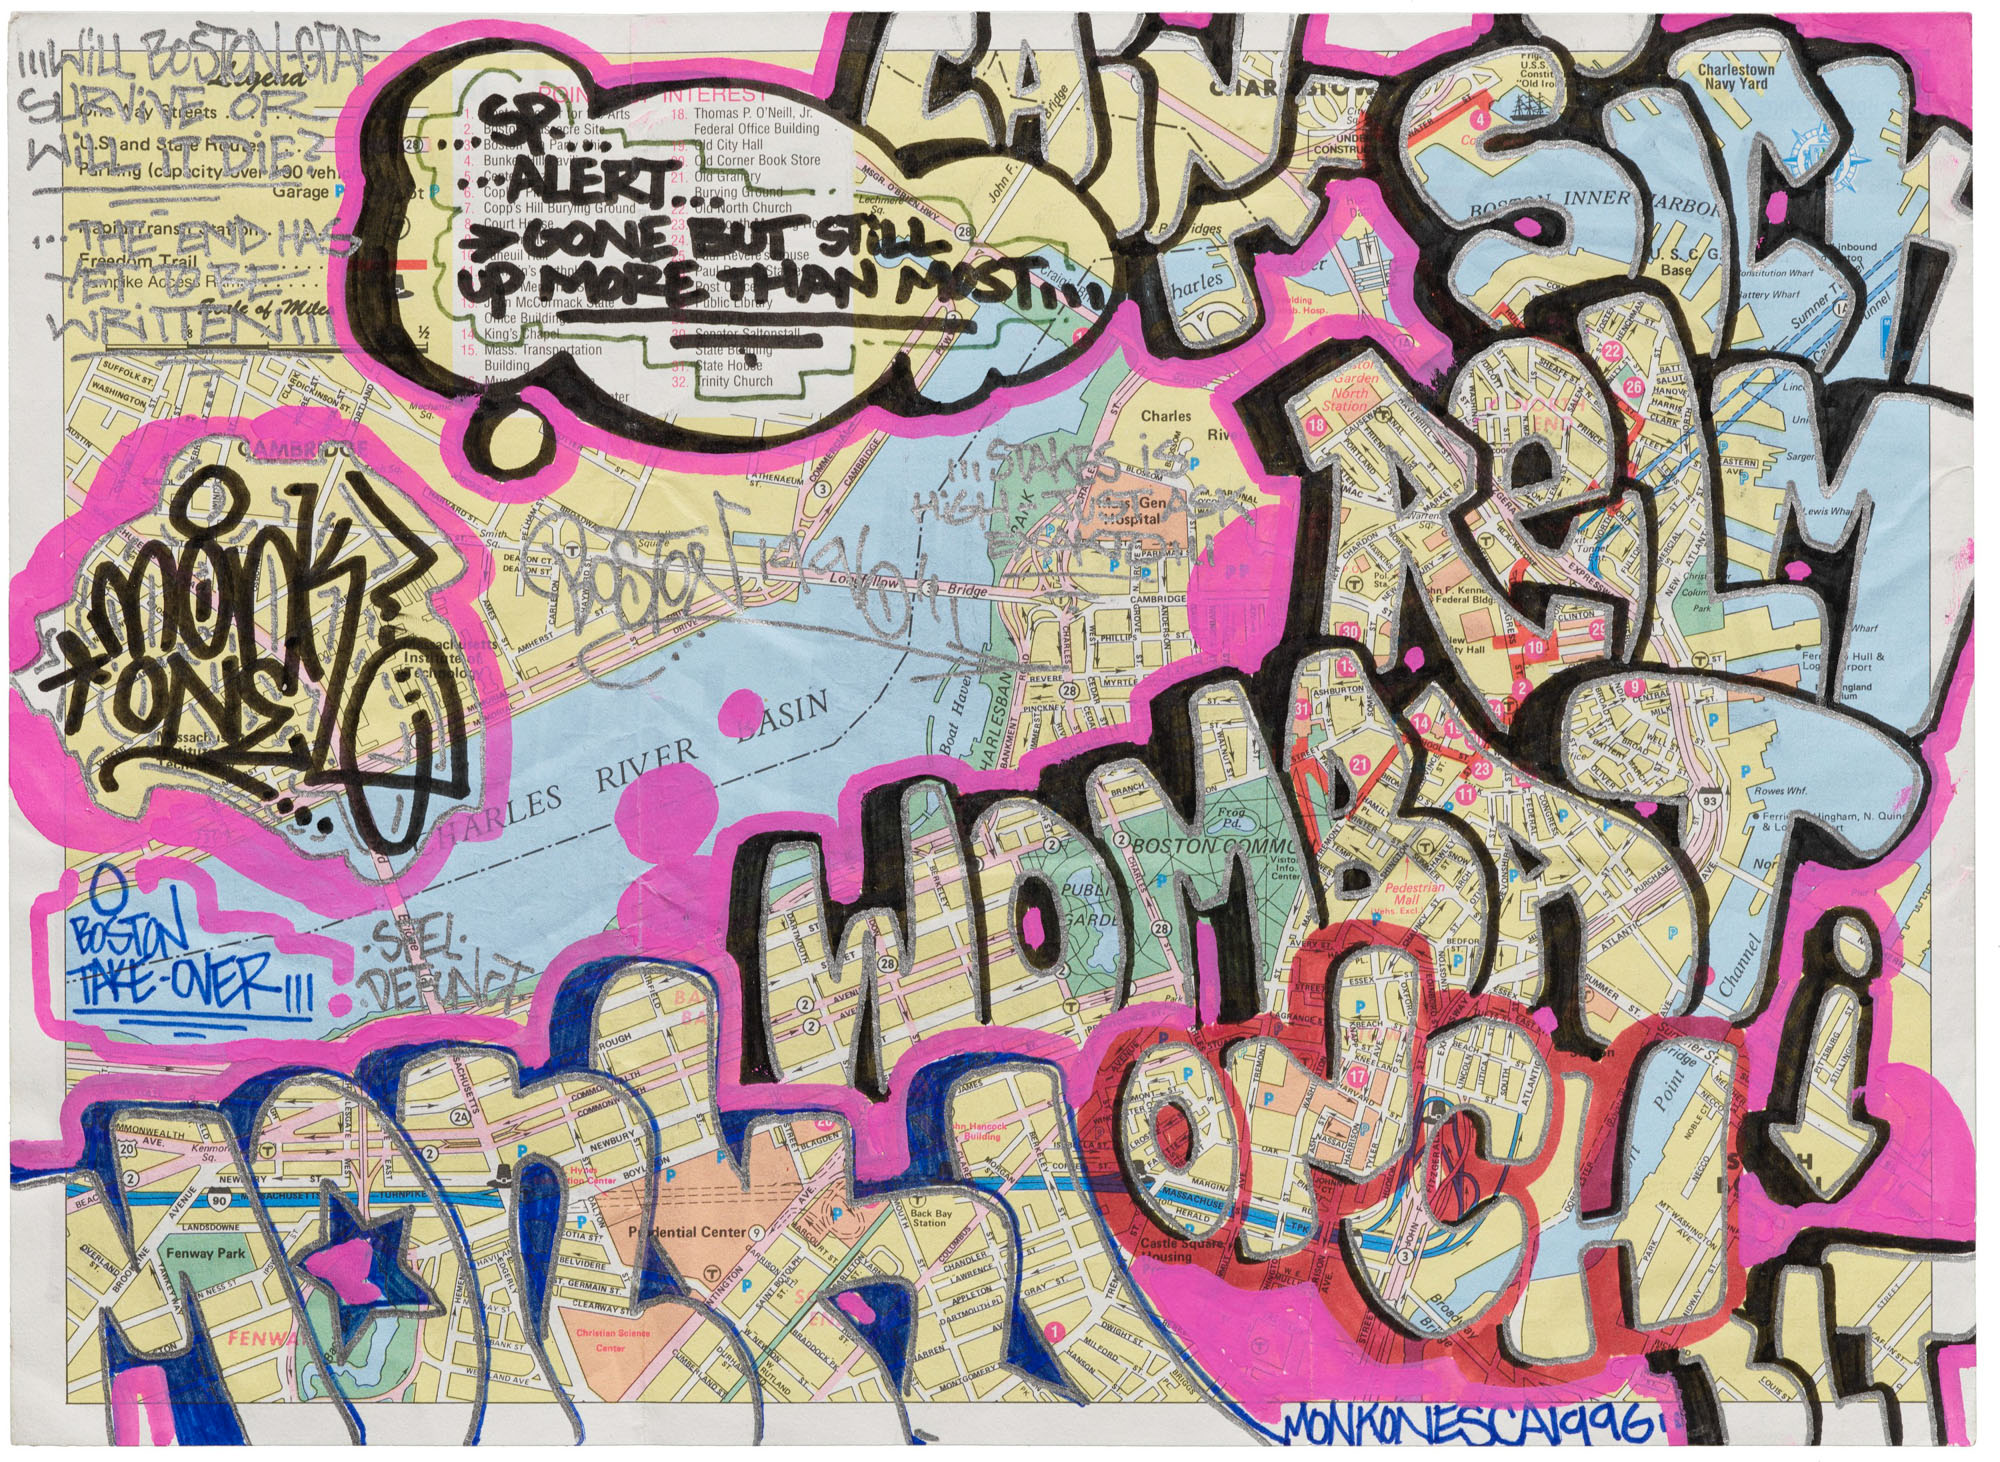 Monk SCA, Boston Take-over, 1996, sharpie and paint marker on map, Boston